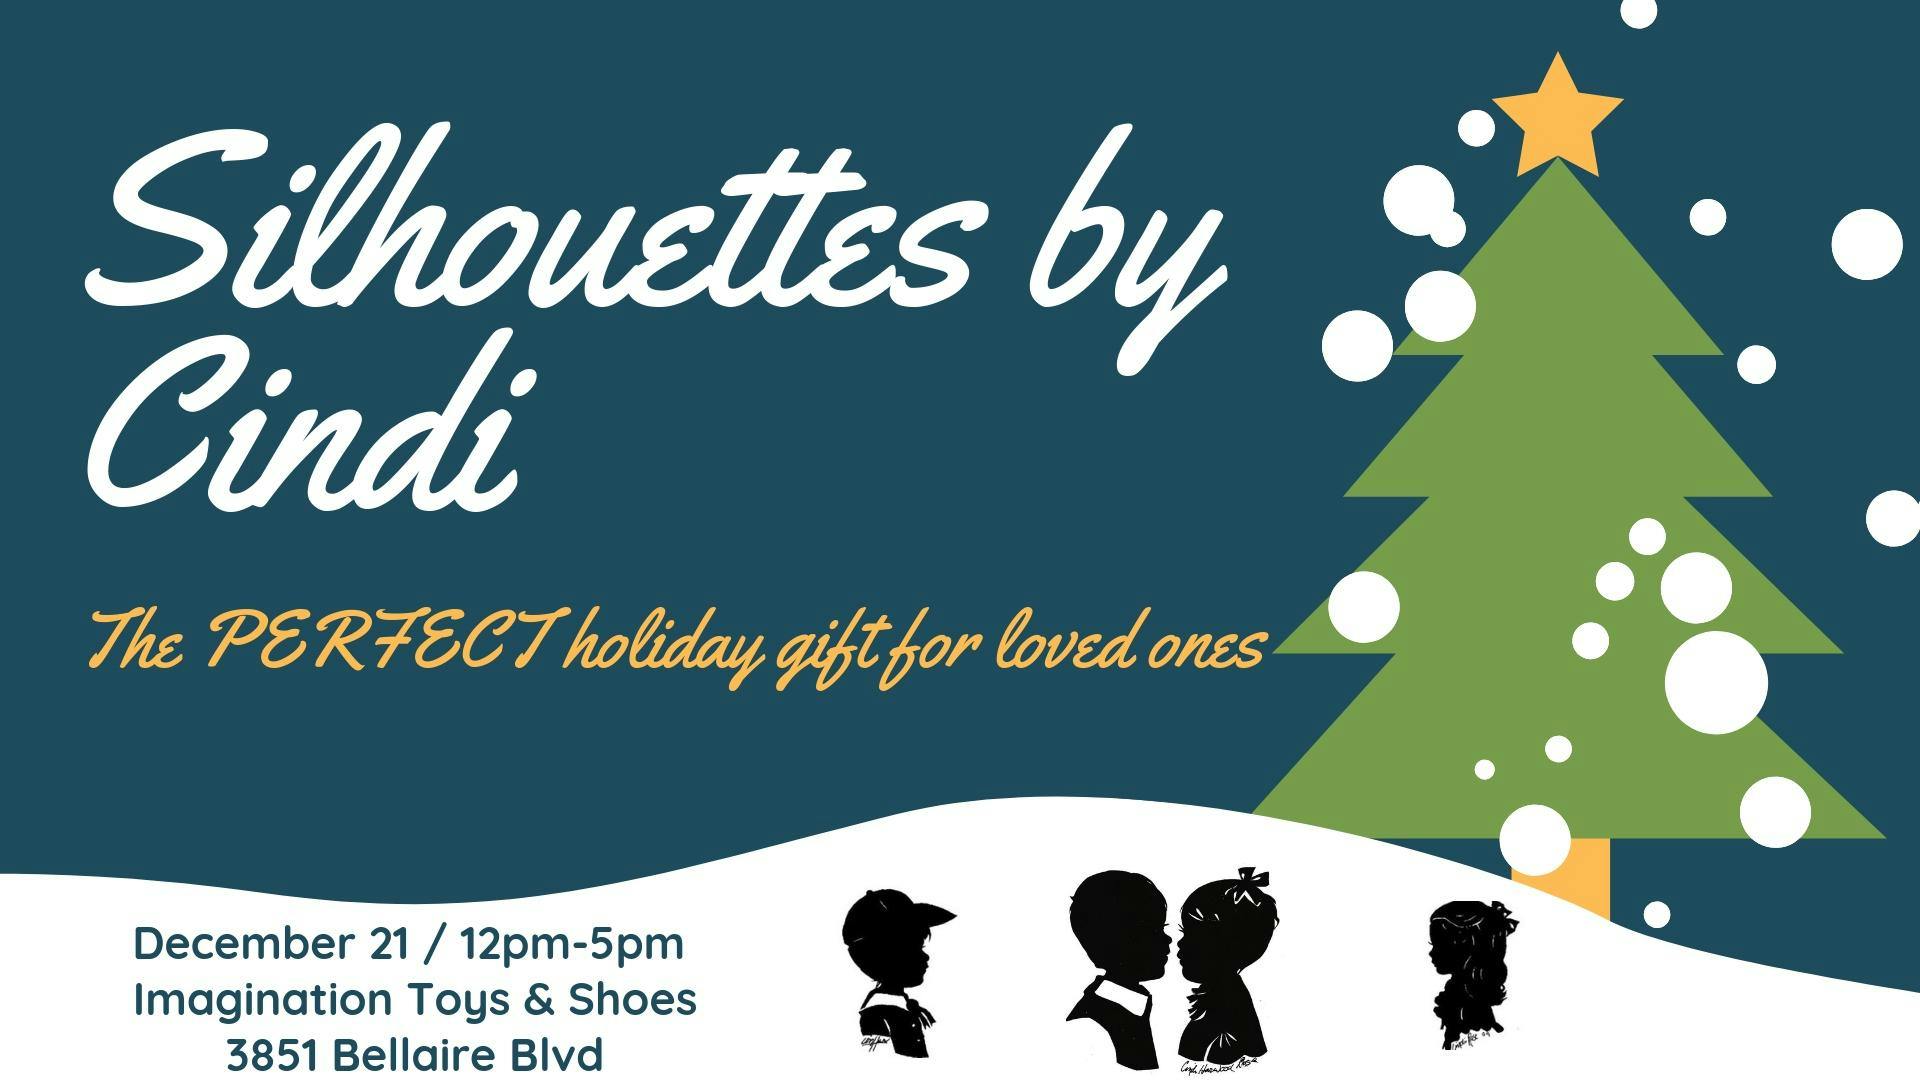 Silhouettes by Cindi at Imagination Toys & Shoes